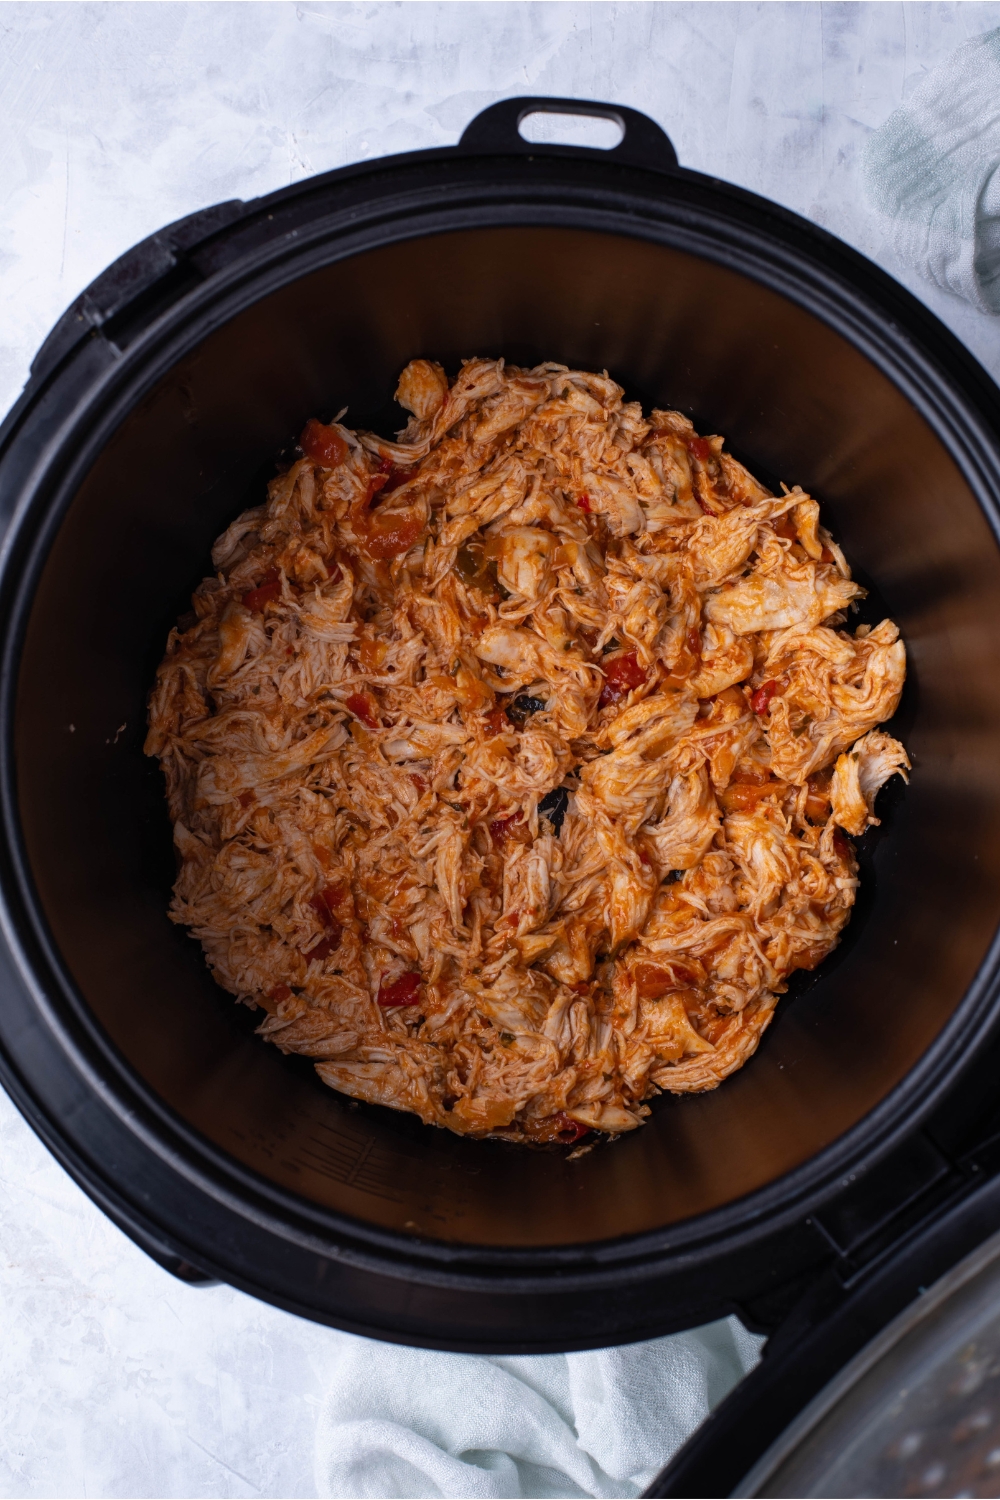 Slow cooker filled with cooked and shredded salsa chicken.